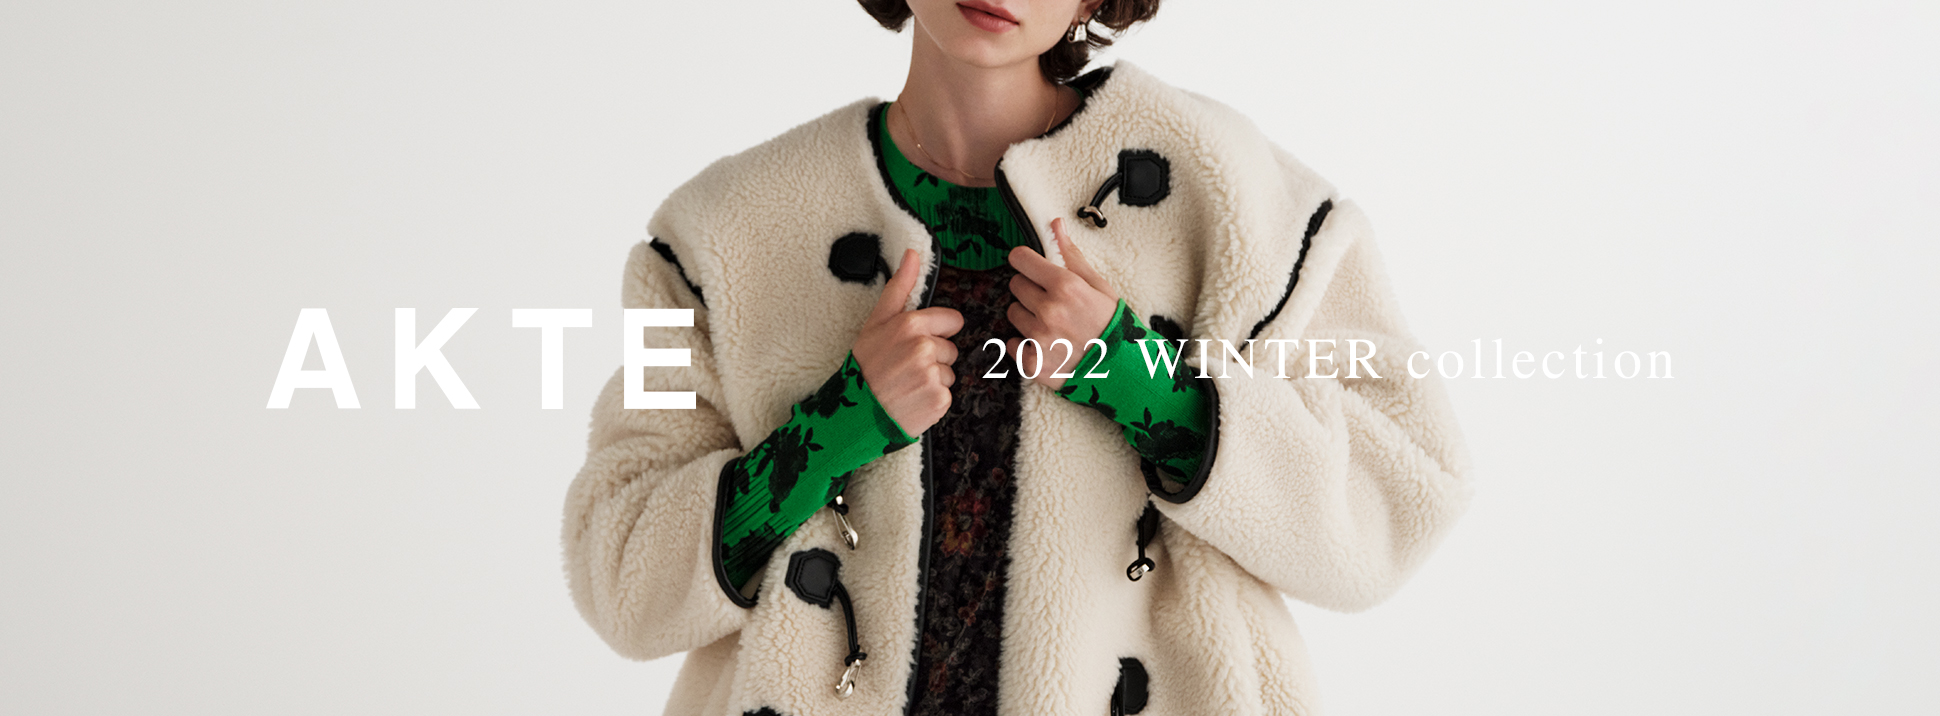 2022 Winter Collection